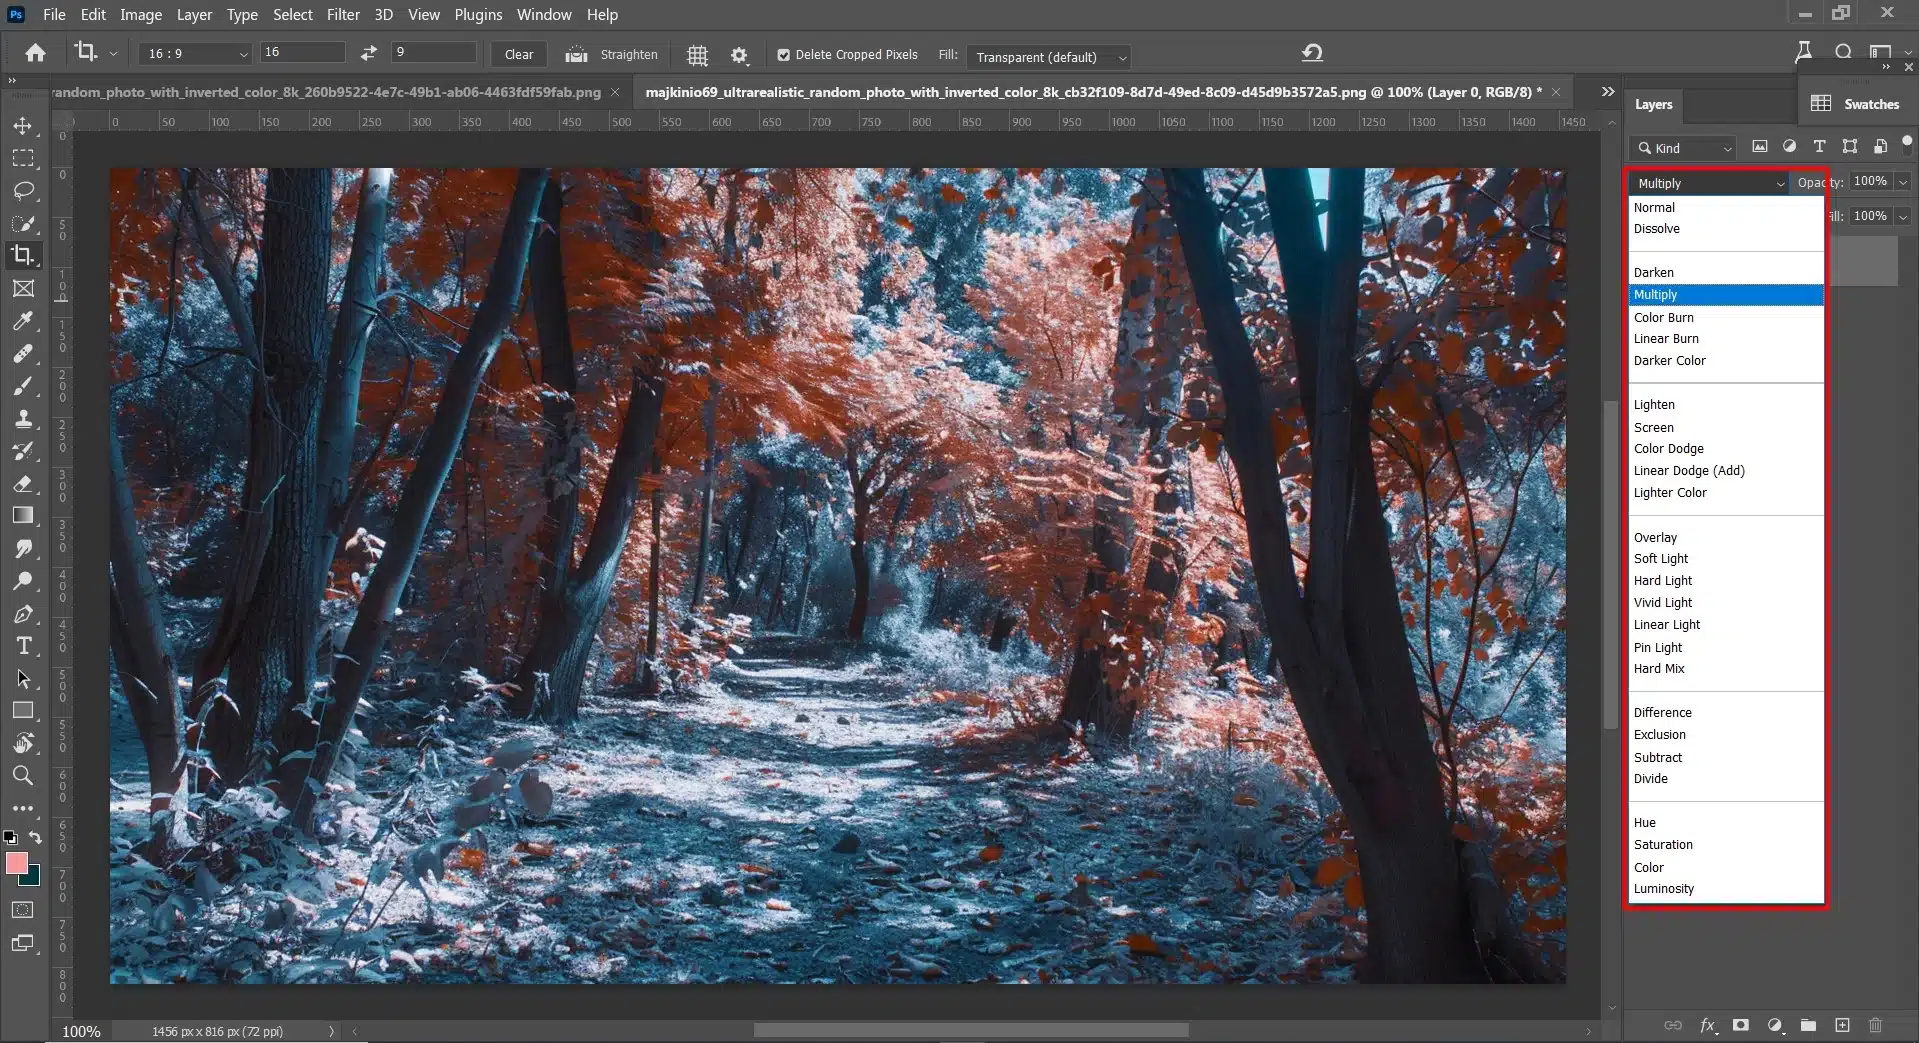 An image demonstrating the effects of different blending modes in Photoshop, showcasing digital editing techniques.